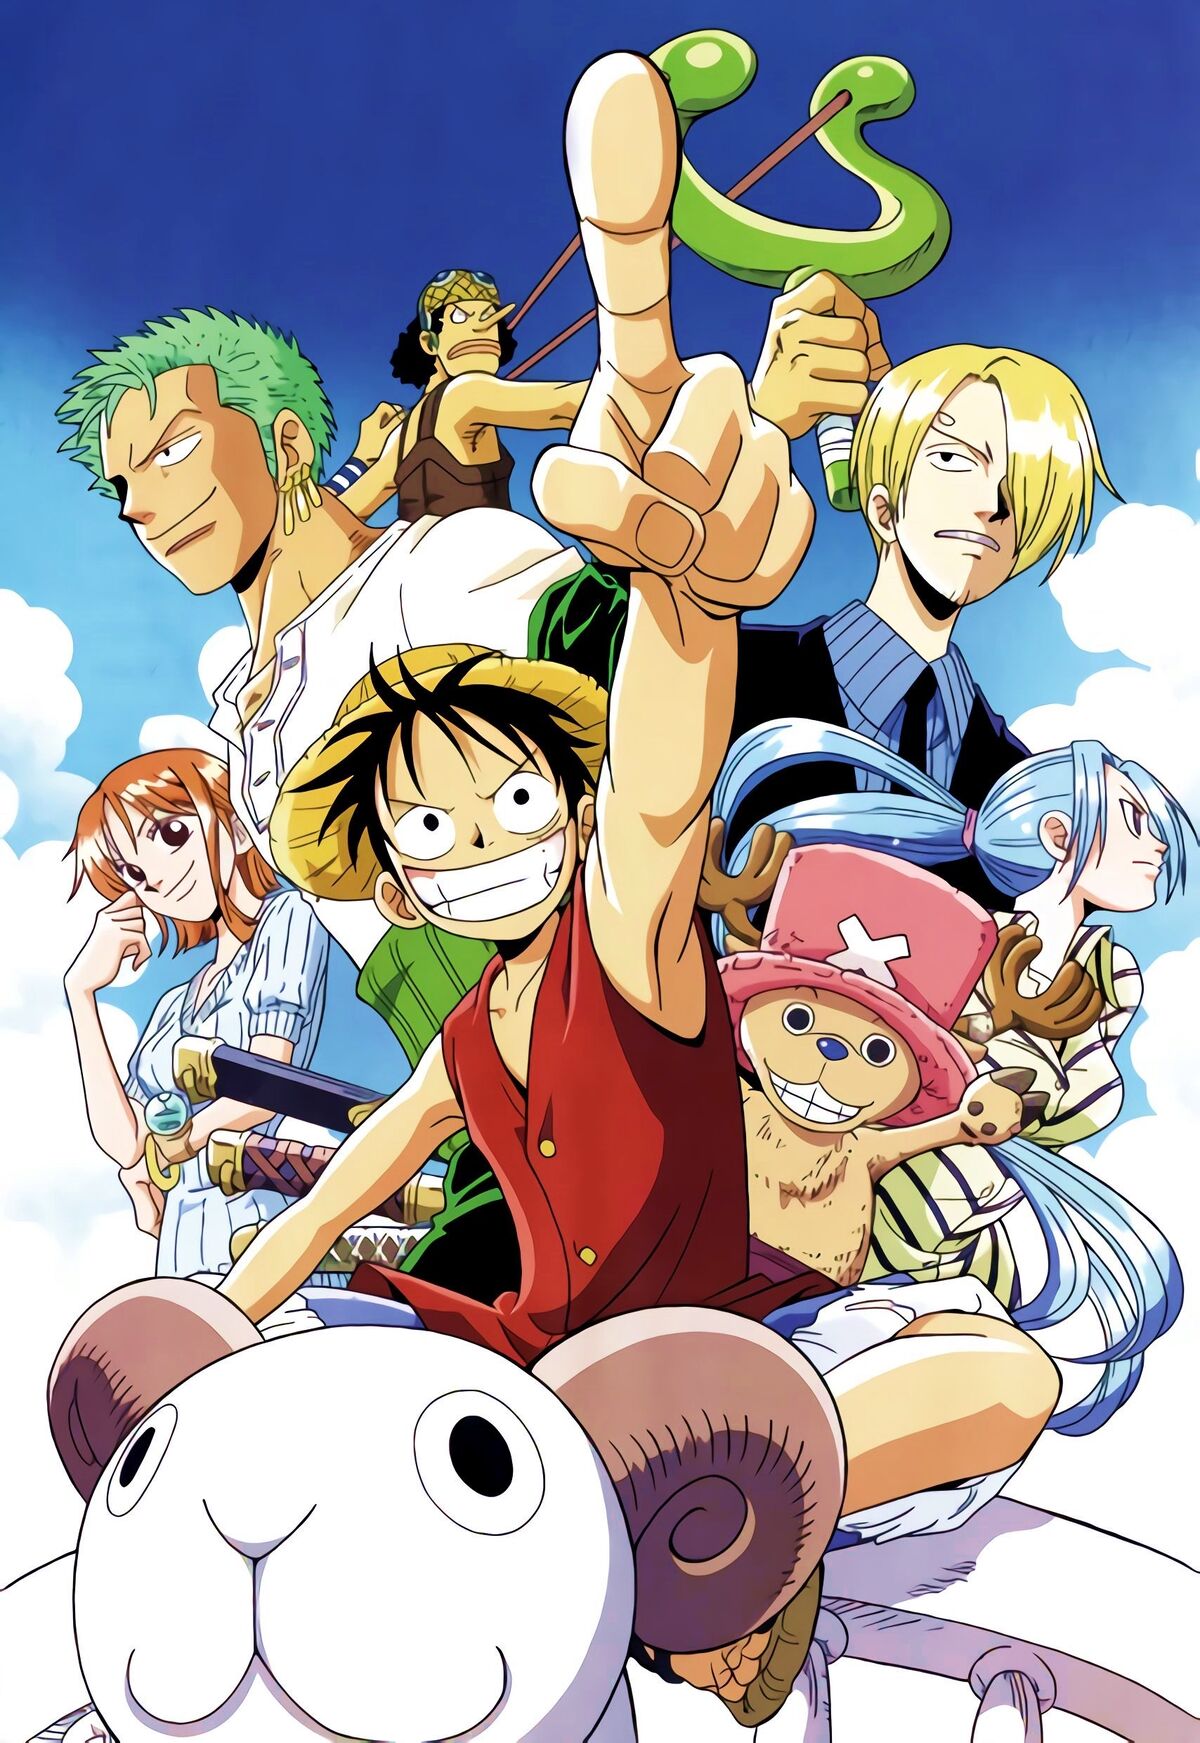 OnePiece Portugal